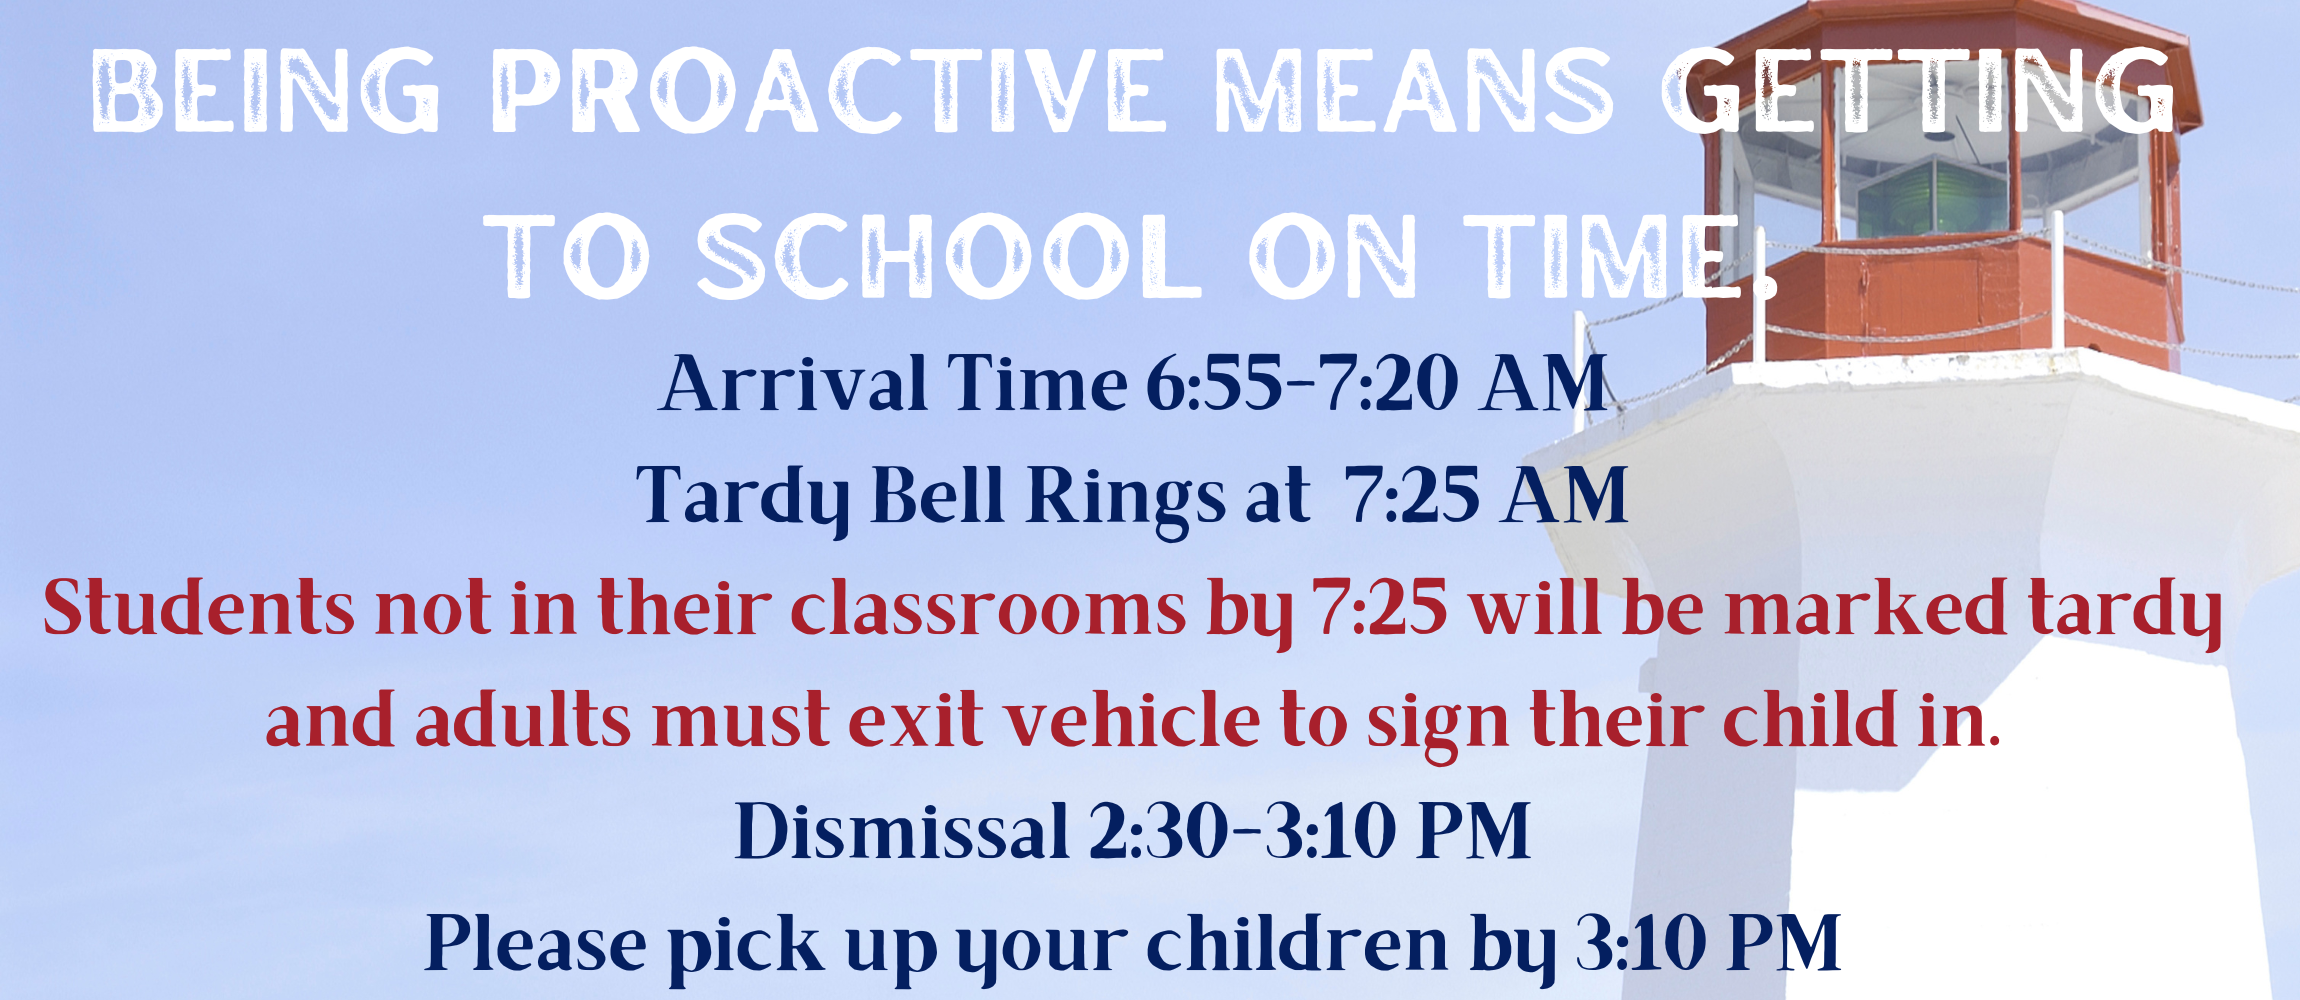 school entry and dismissal times